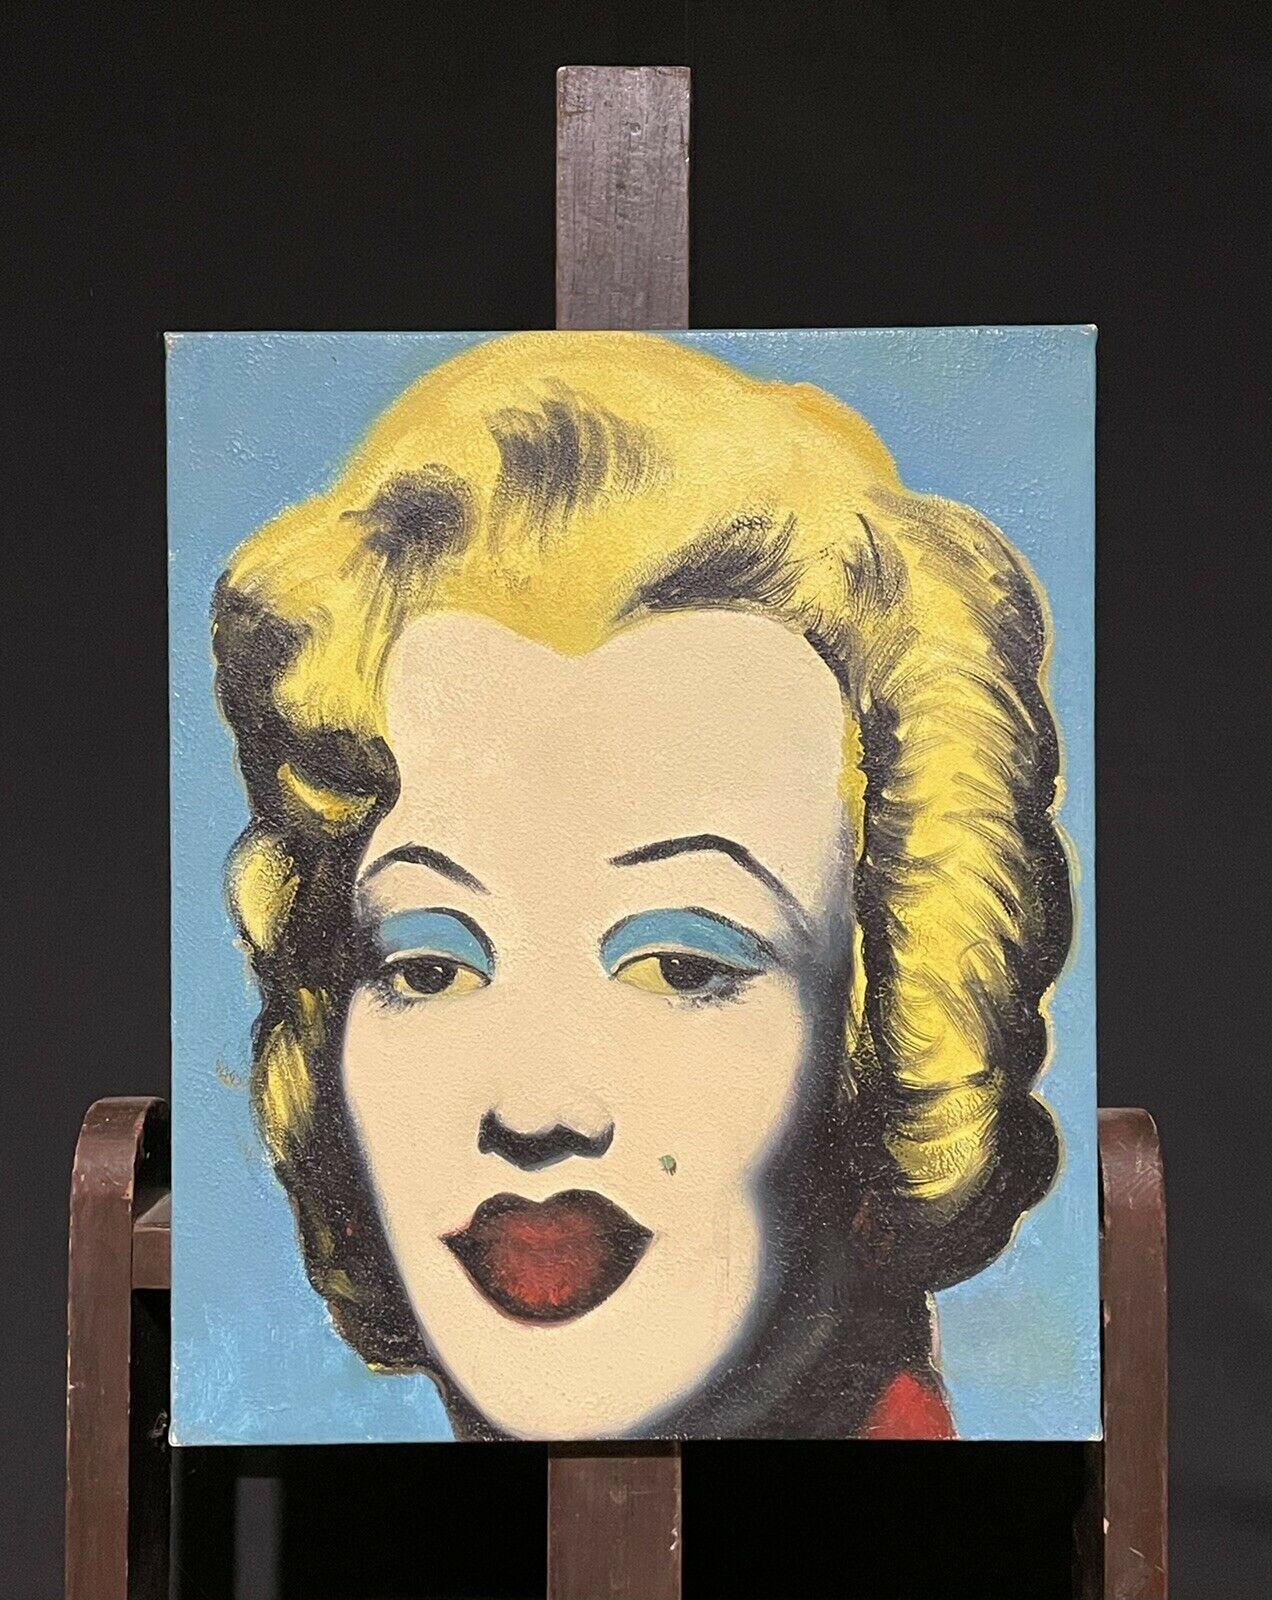 MARILYN MONROE PORTRAIT - POP ART STYLE PAINTING  - Painting by Unknown